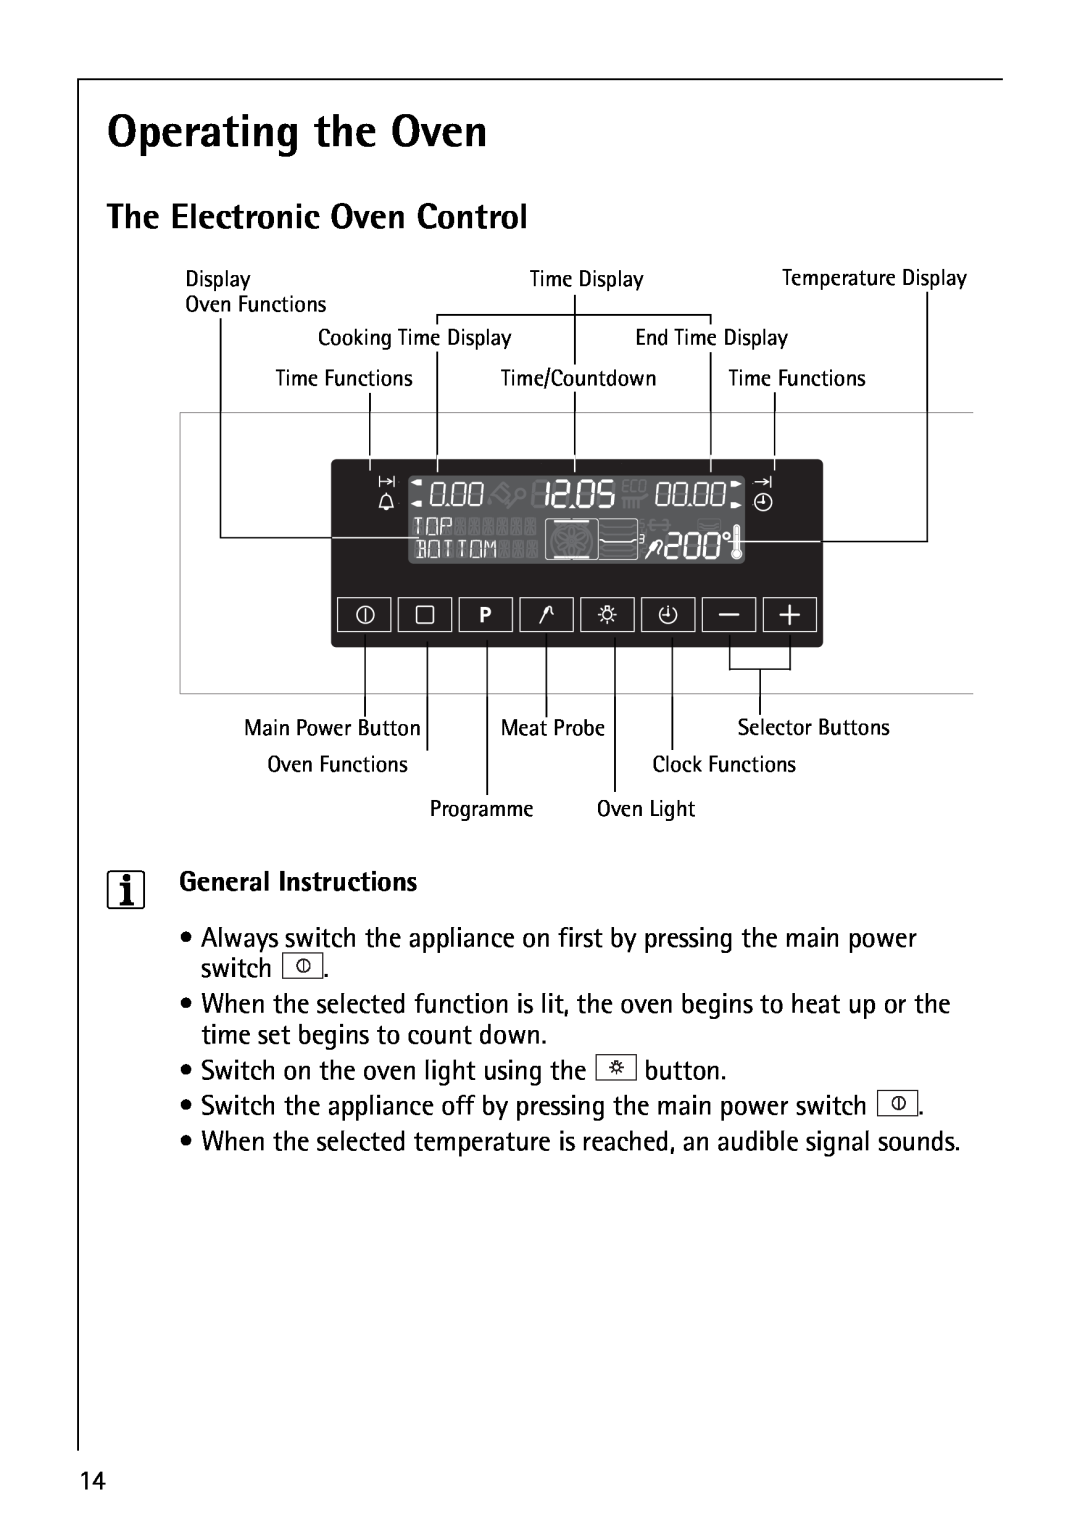 AEG B8920-1 manual Operating the Oven, The Electronic Oven Control, General Instructions 